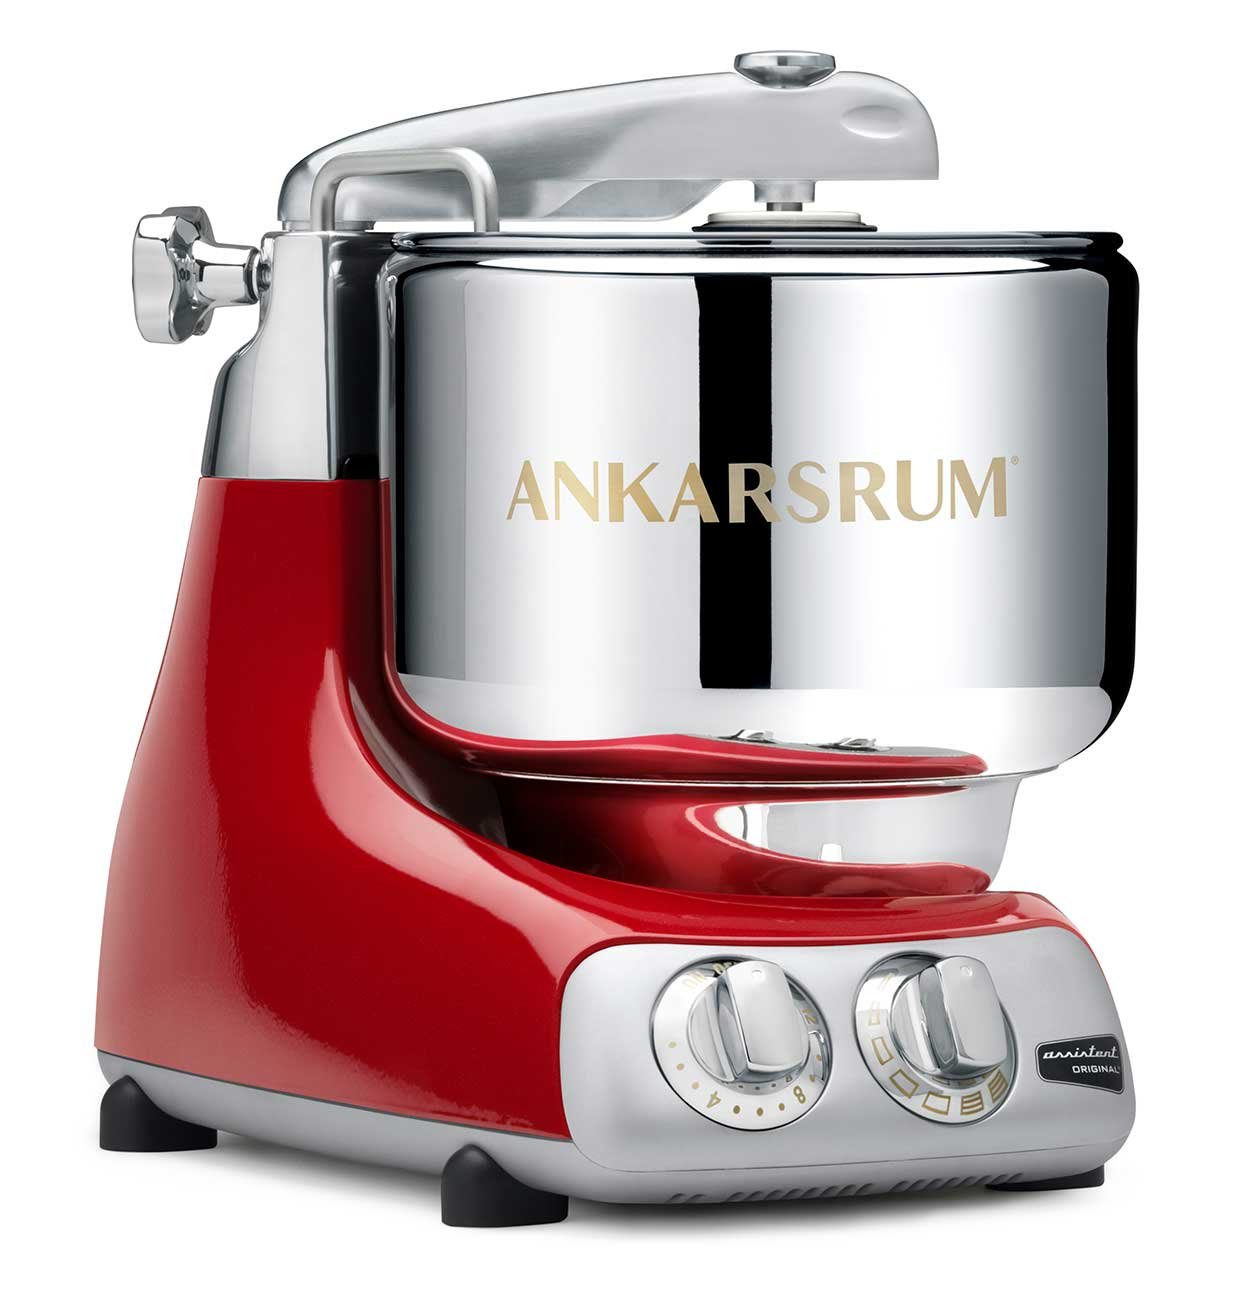 Angled shot of a red Ankarsrum stand mixer with a silver mixing bowl